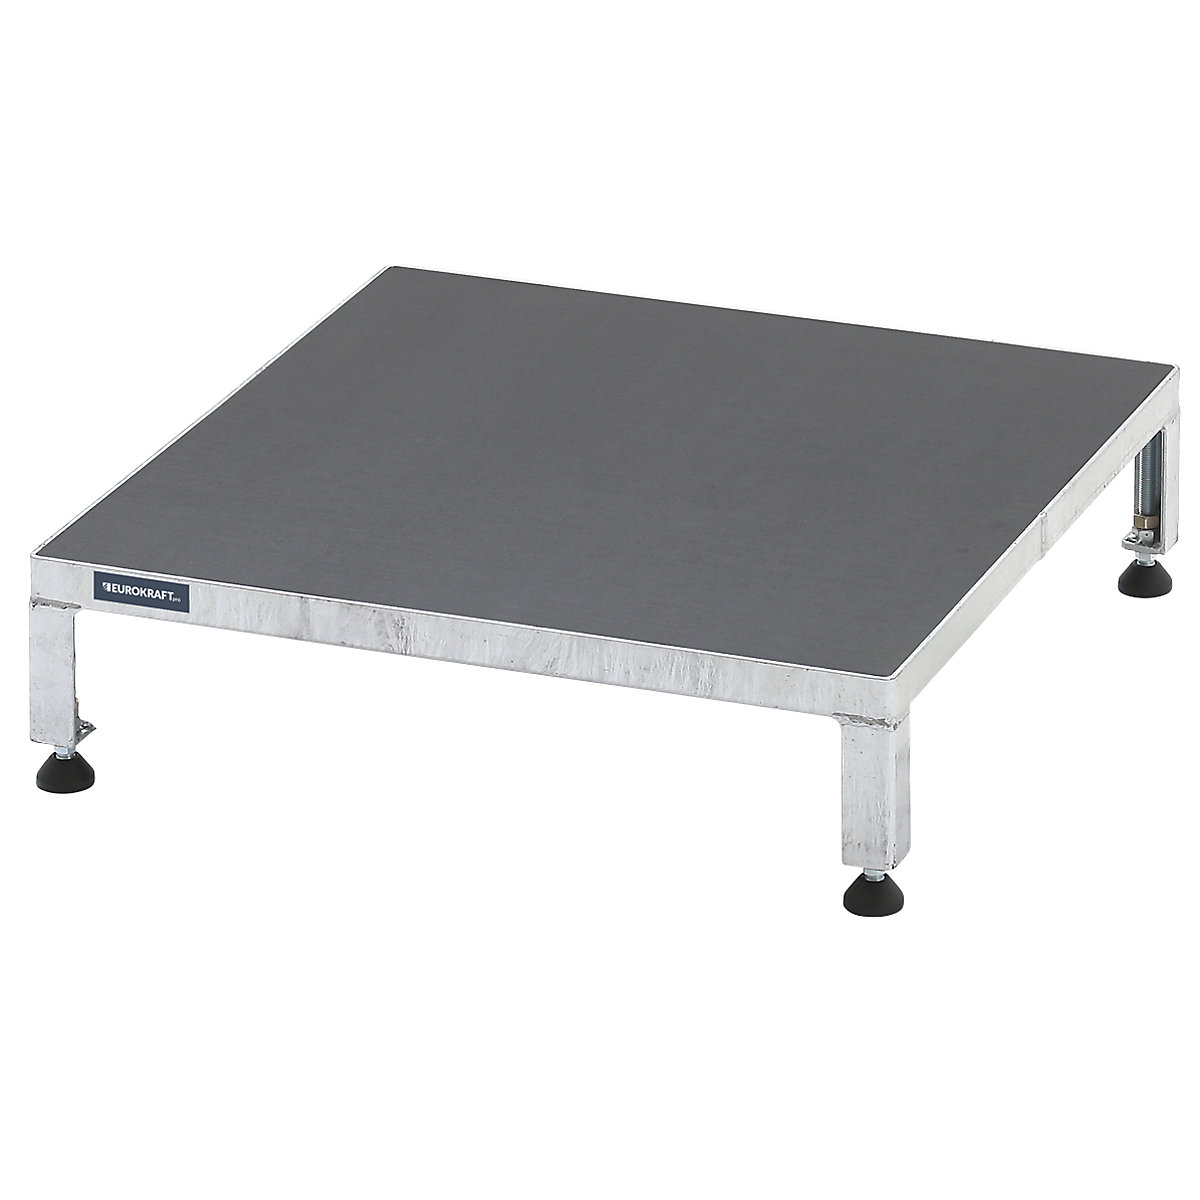 Working platform, height adjustable from 165 – 230 mm – eurokraft pro, with phenolic plywood panel, platform LxW 610 x 610 mm, hot dip galvanised-9